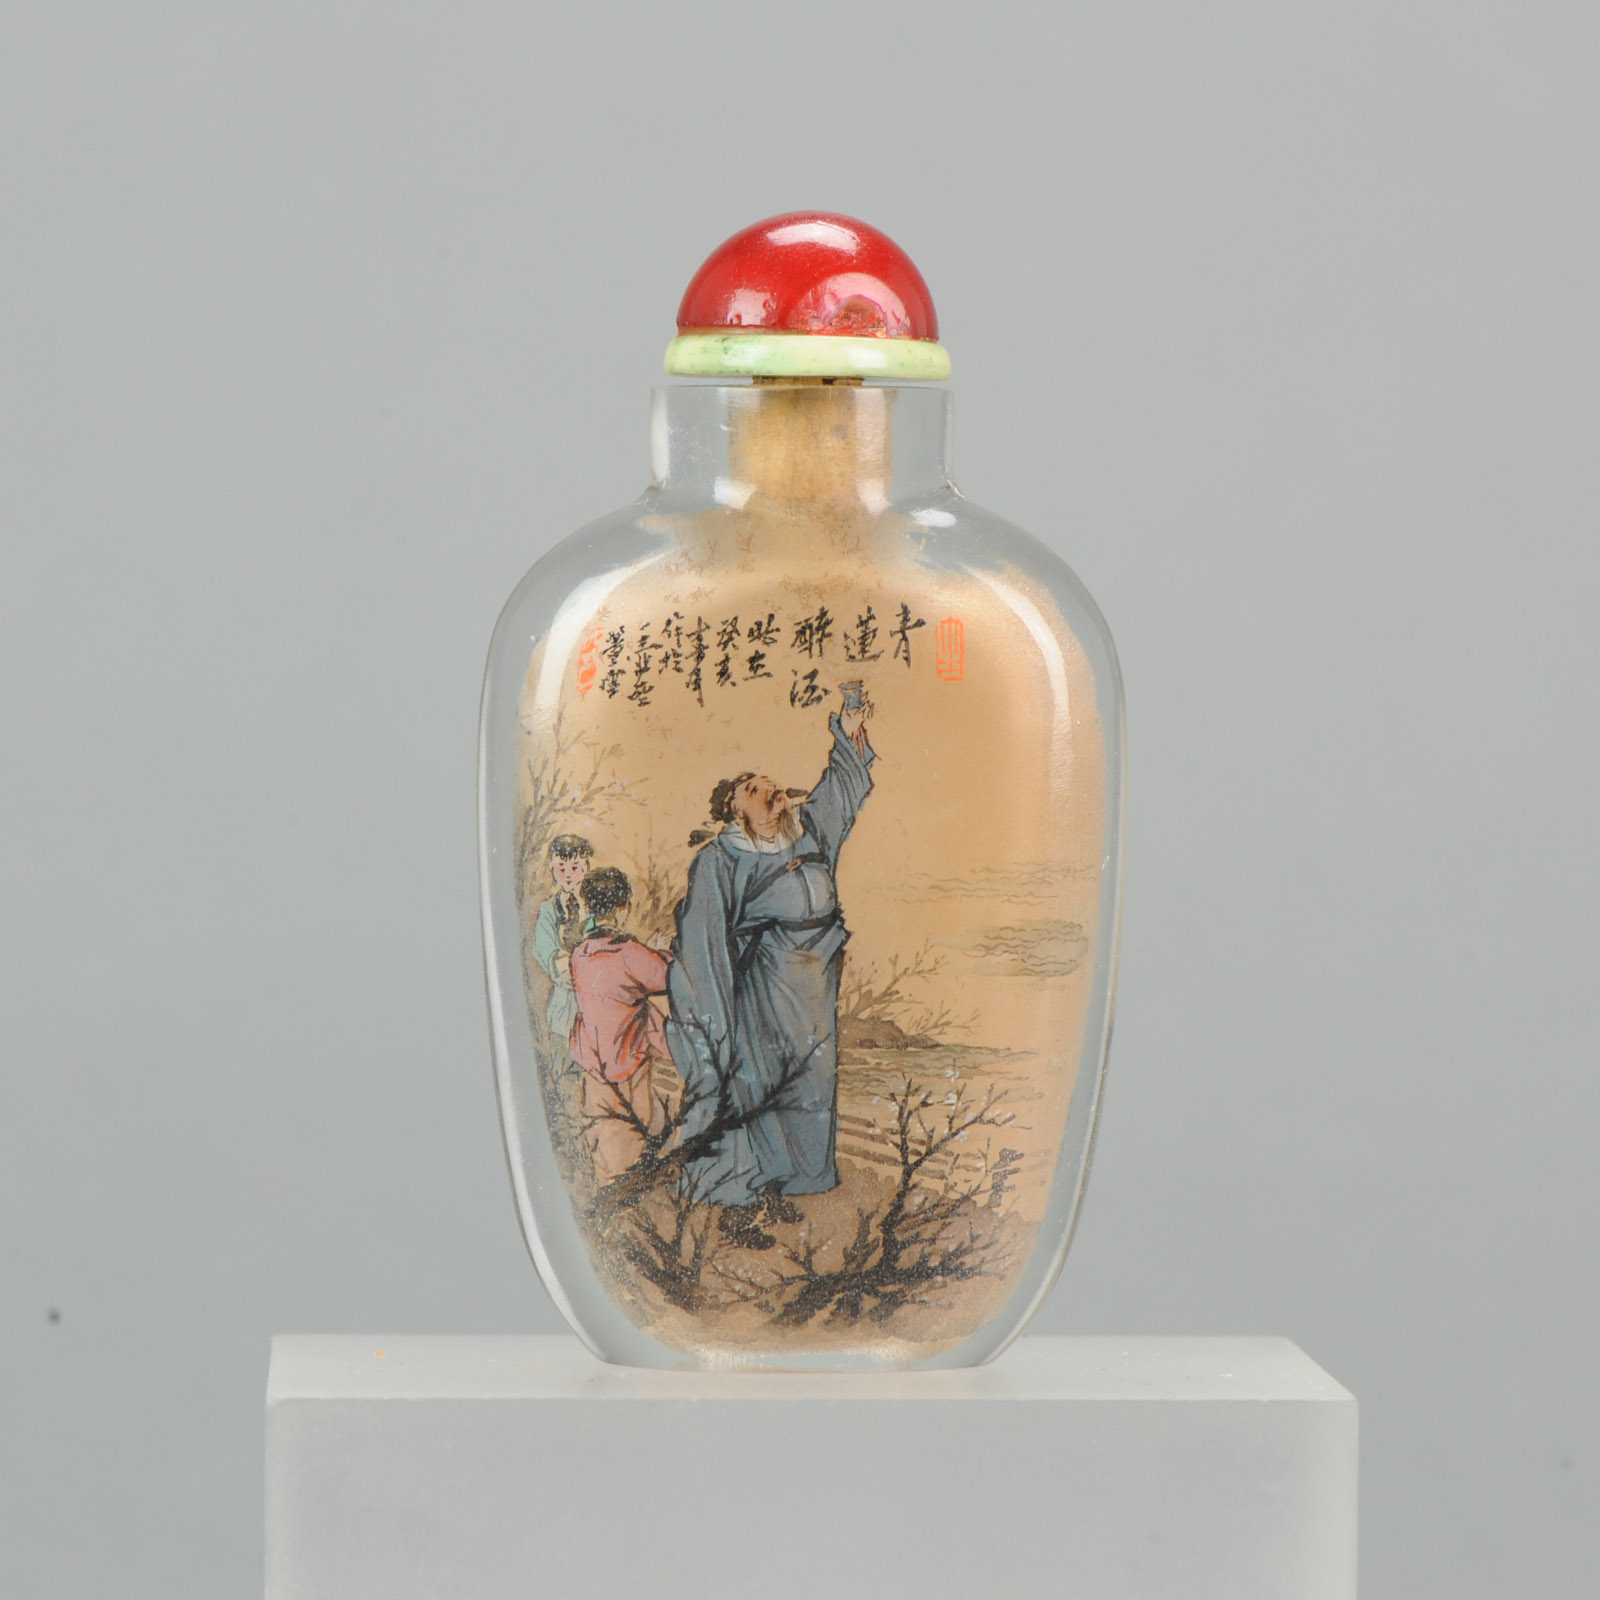 Chinese Antique coloured glaze Inner painting Meng Xiaodong snuff bottle 